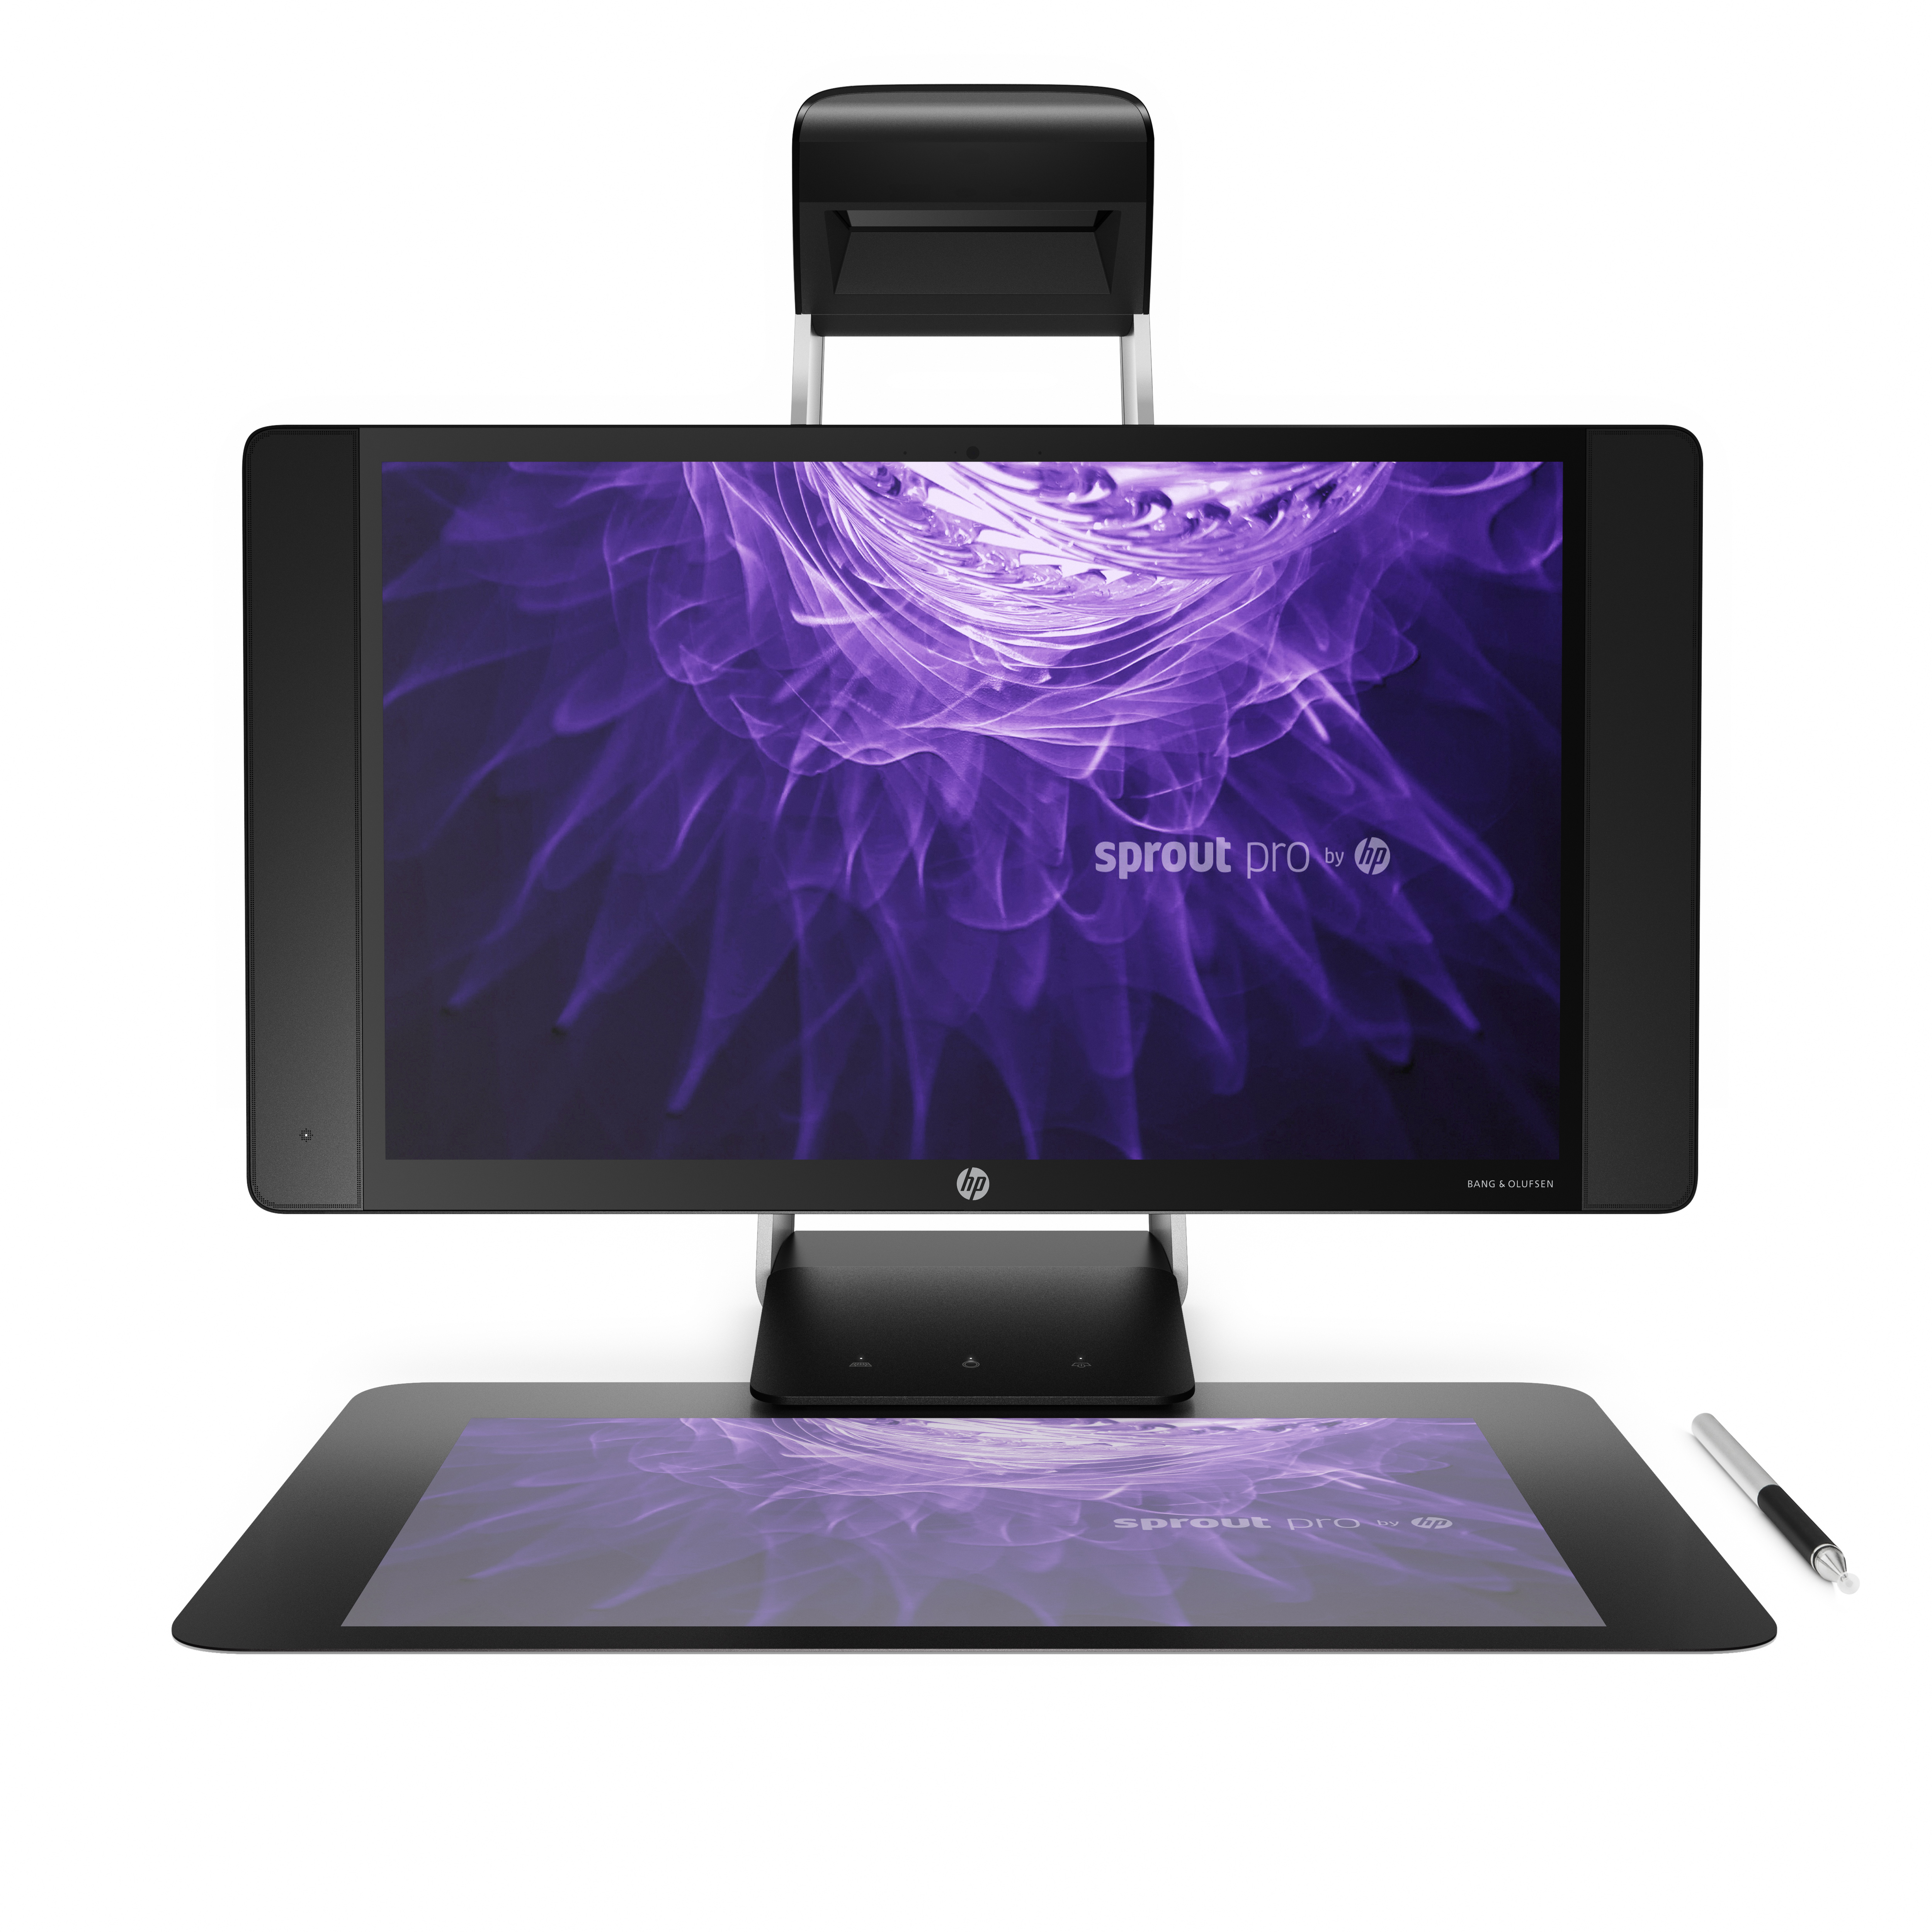 The new Sprout Pro by HP powered by Windows 10